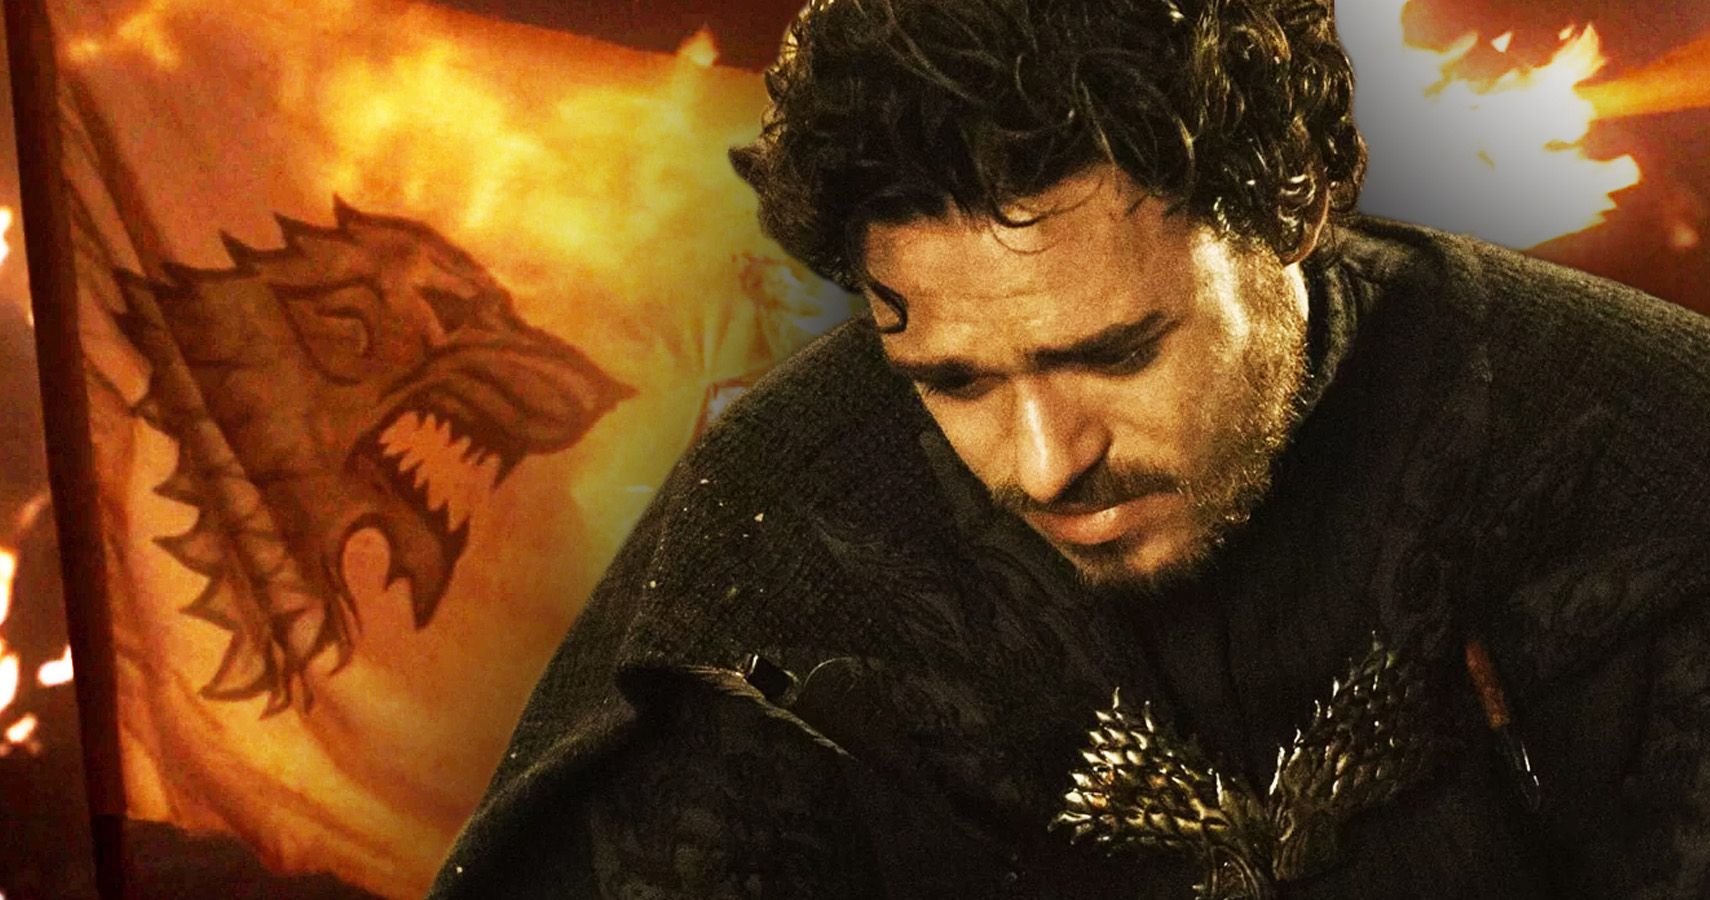 The 15 Worst Episodes Of Game Of Thrones According To Imdb And